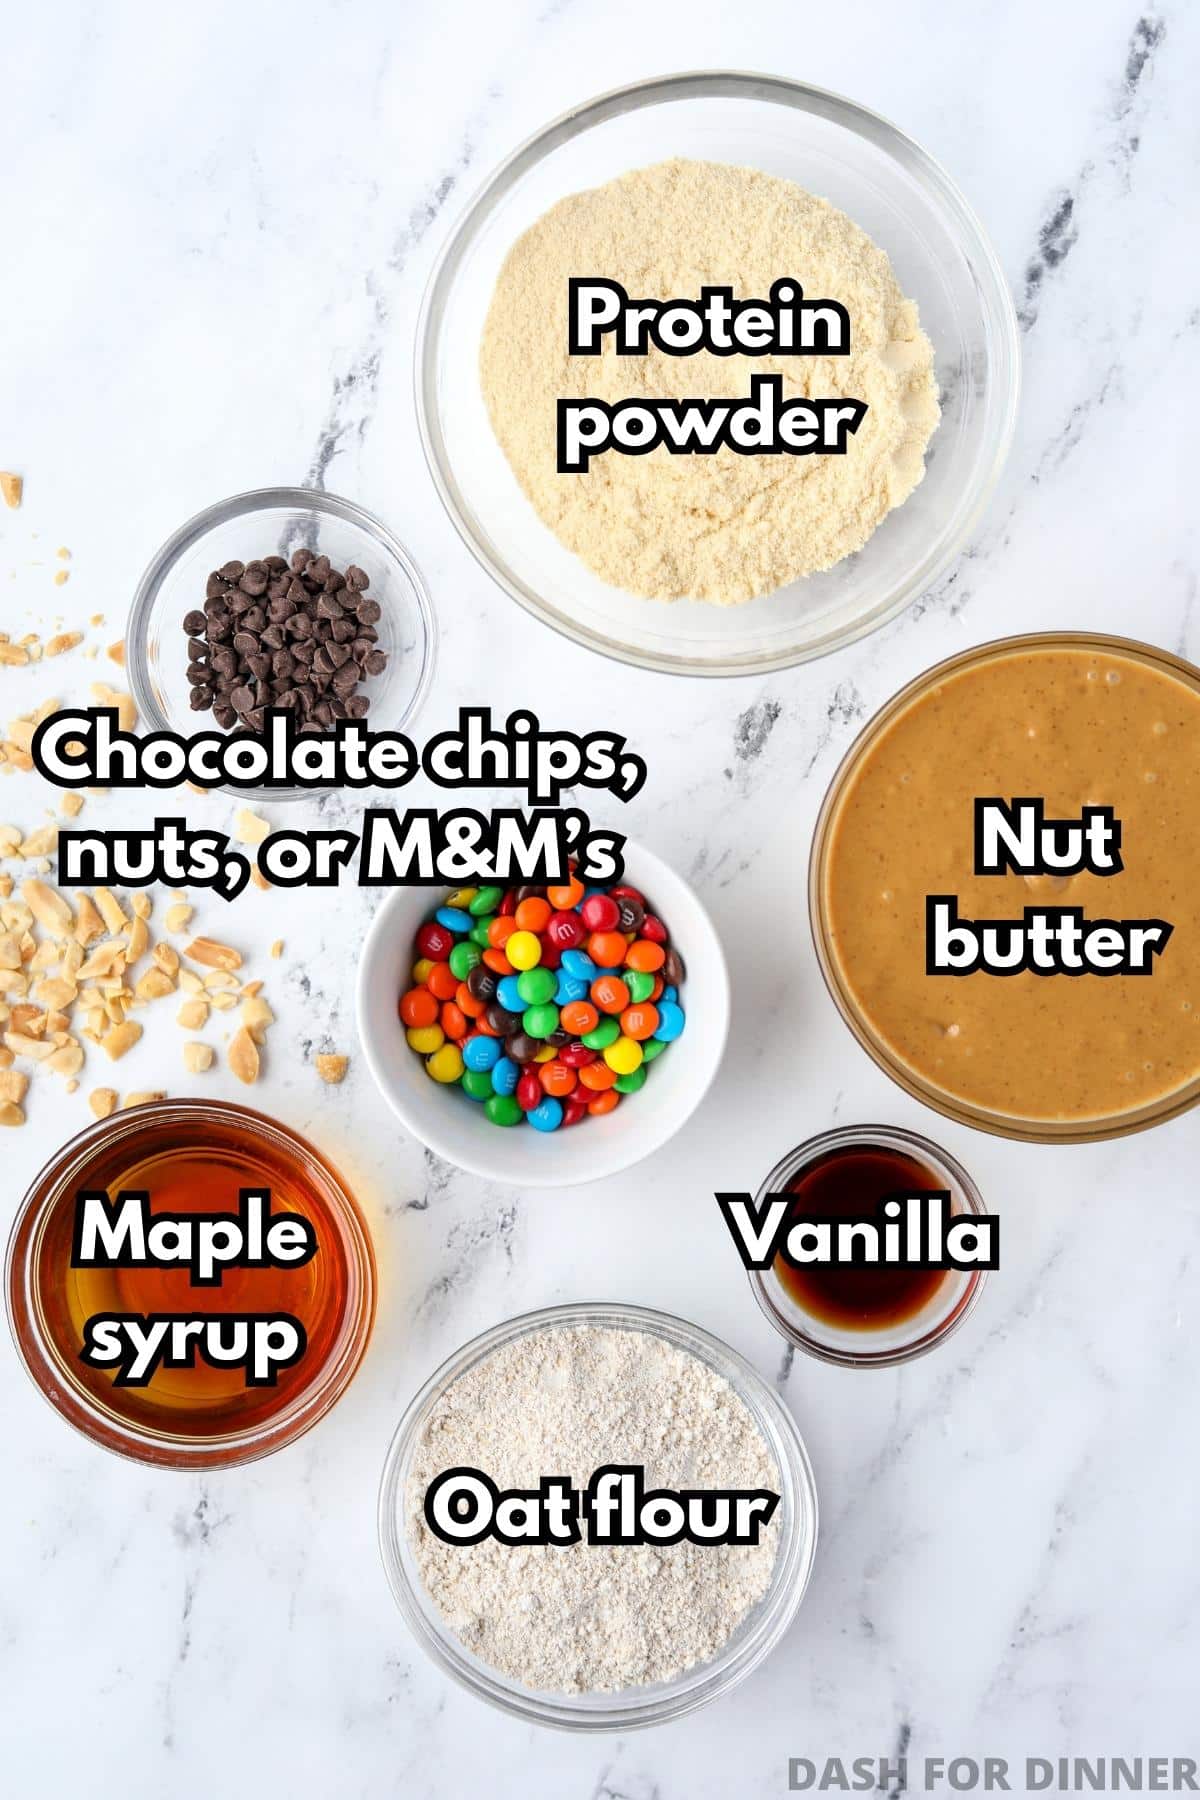 The ingredients needed to make protein cookie dough: nut butter, protein powder, mix-ins, maple syrup, oat flour, and vanilla.